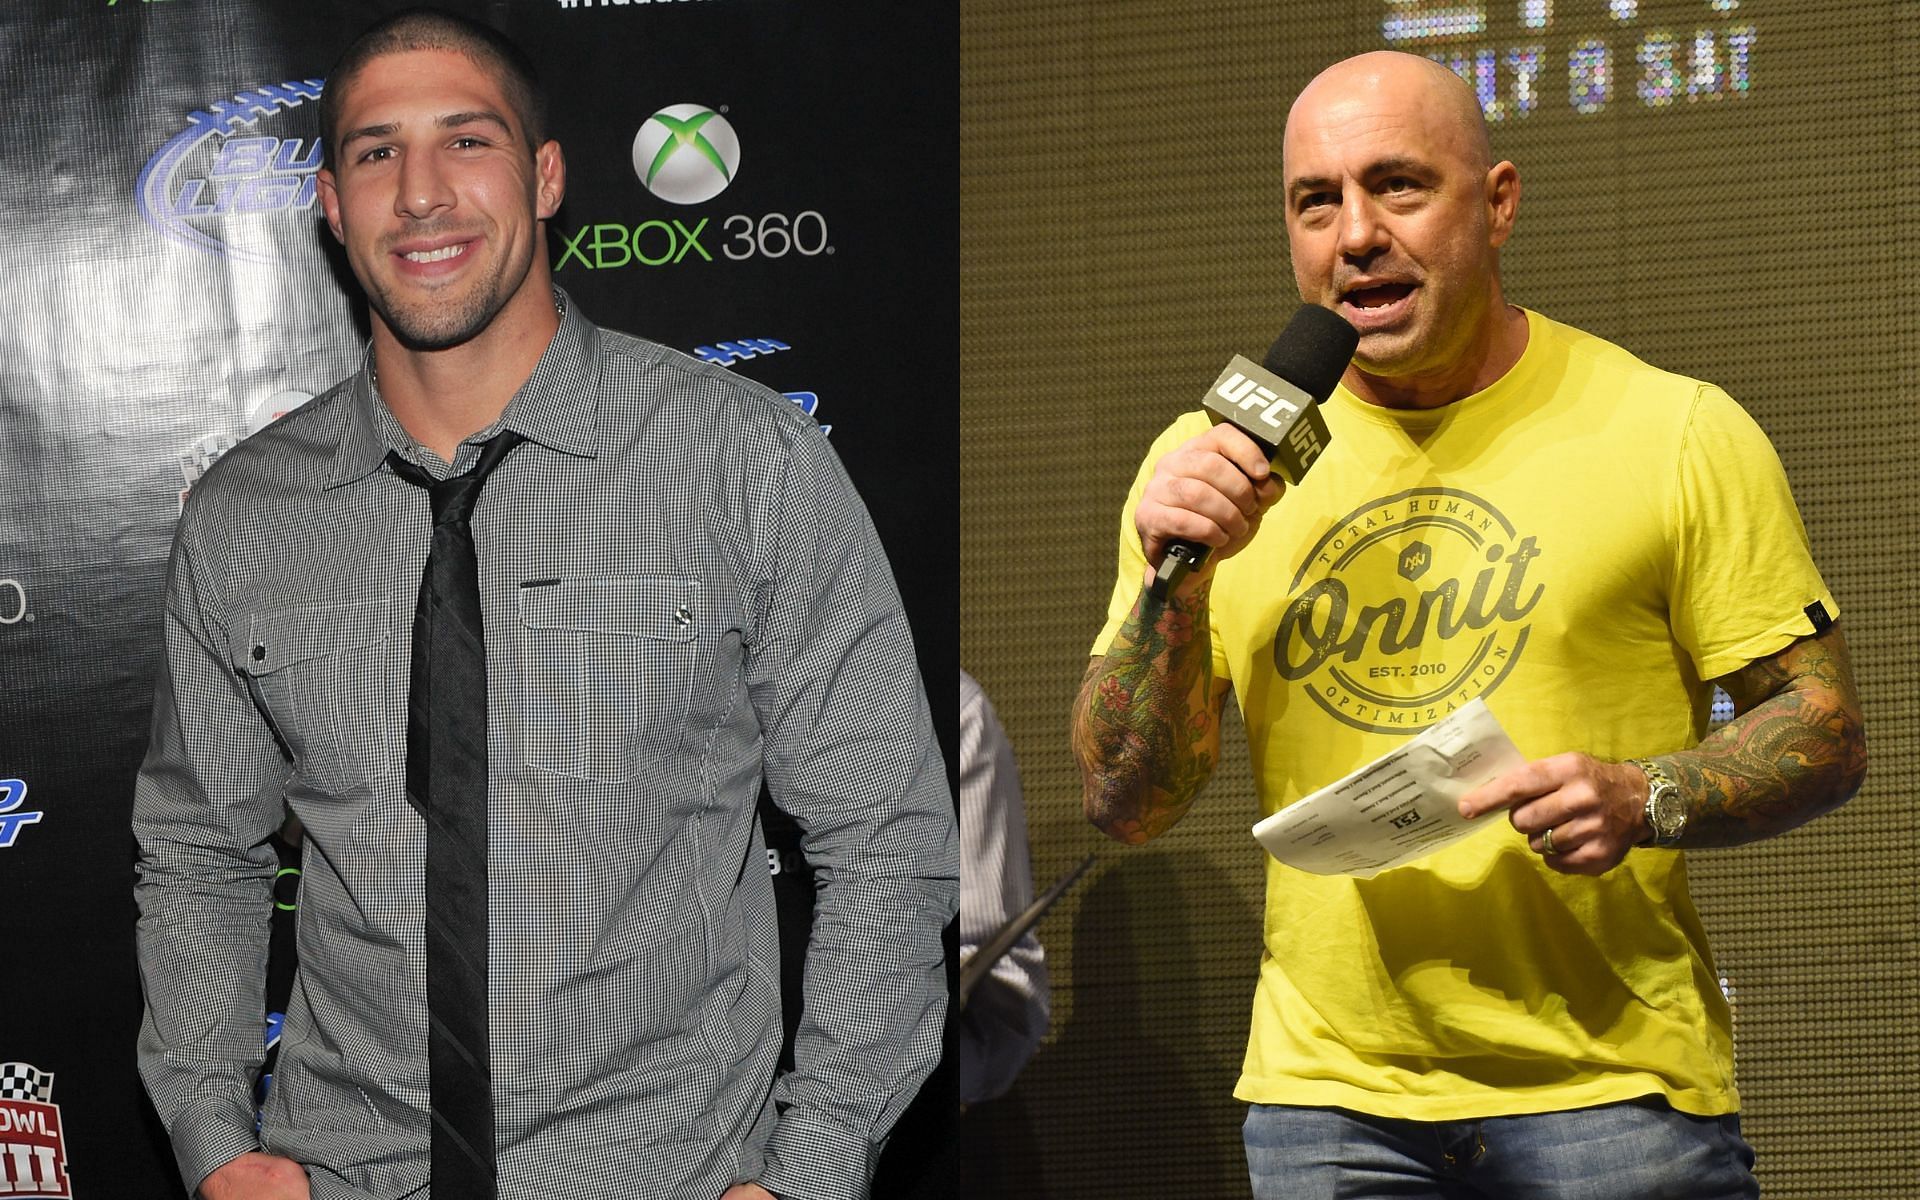 Former mixed martial artist Brendan Schaub (left) and current UFC commentator Joe Rogan (right) at different promotional events